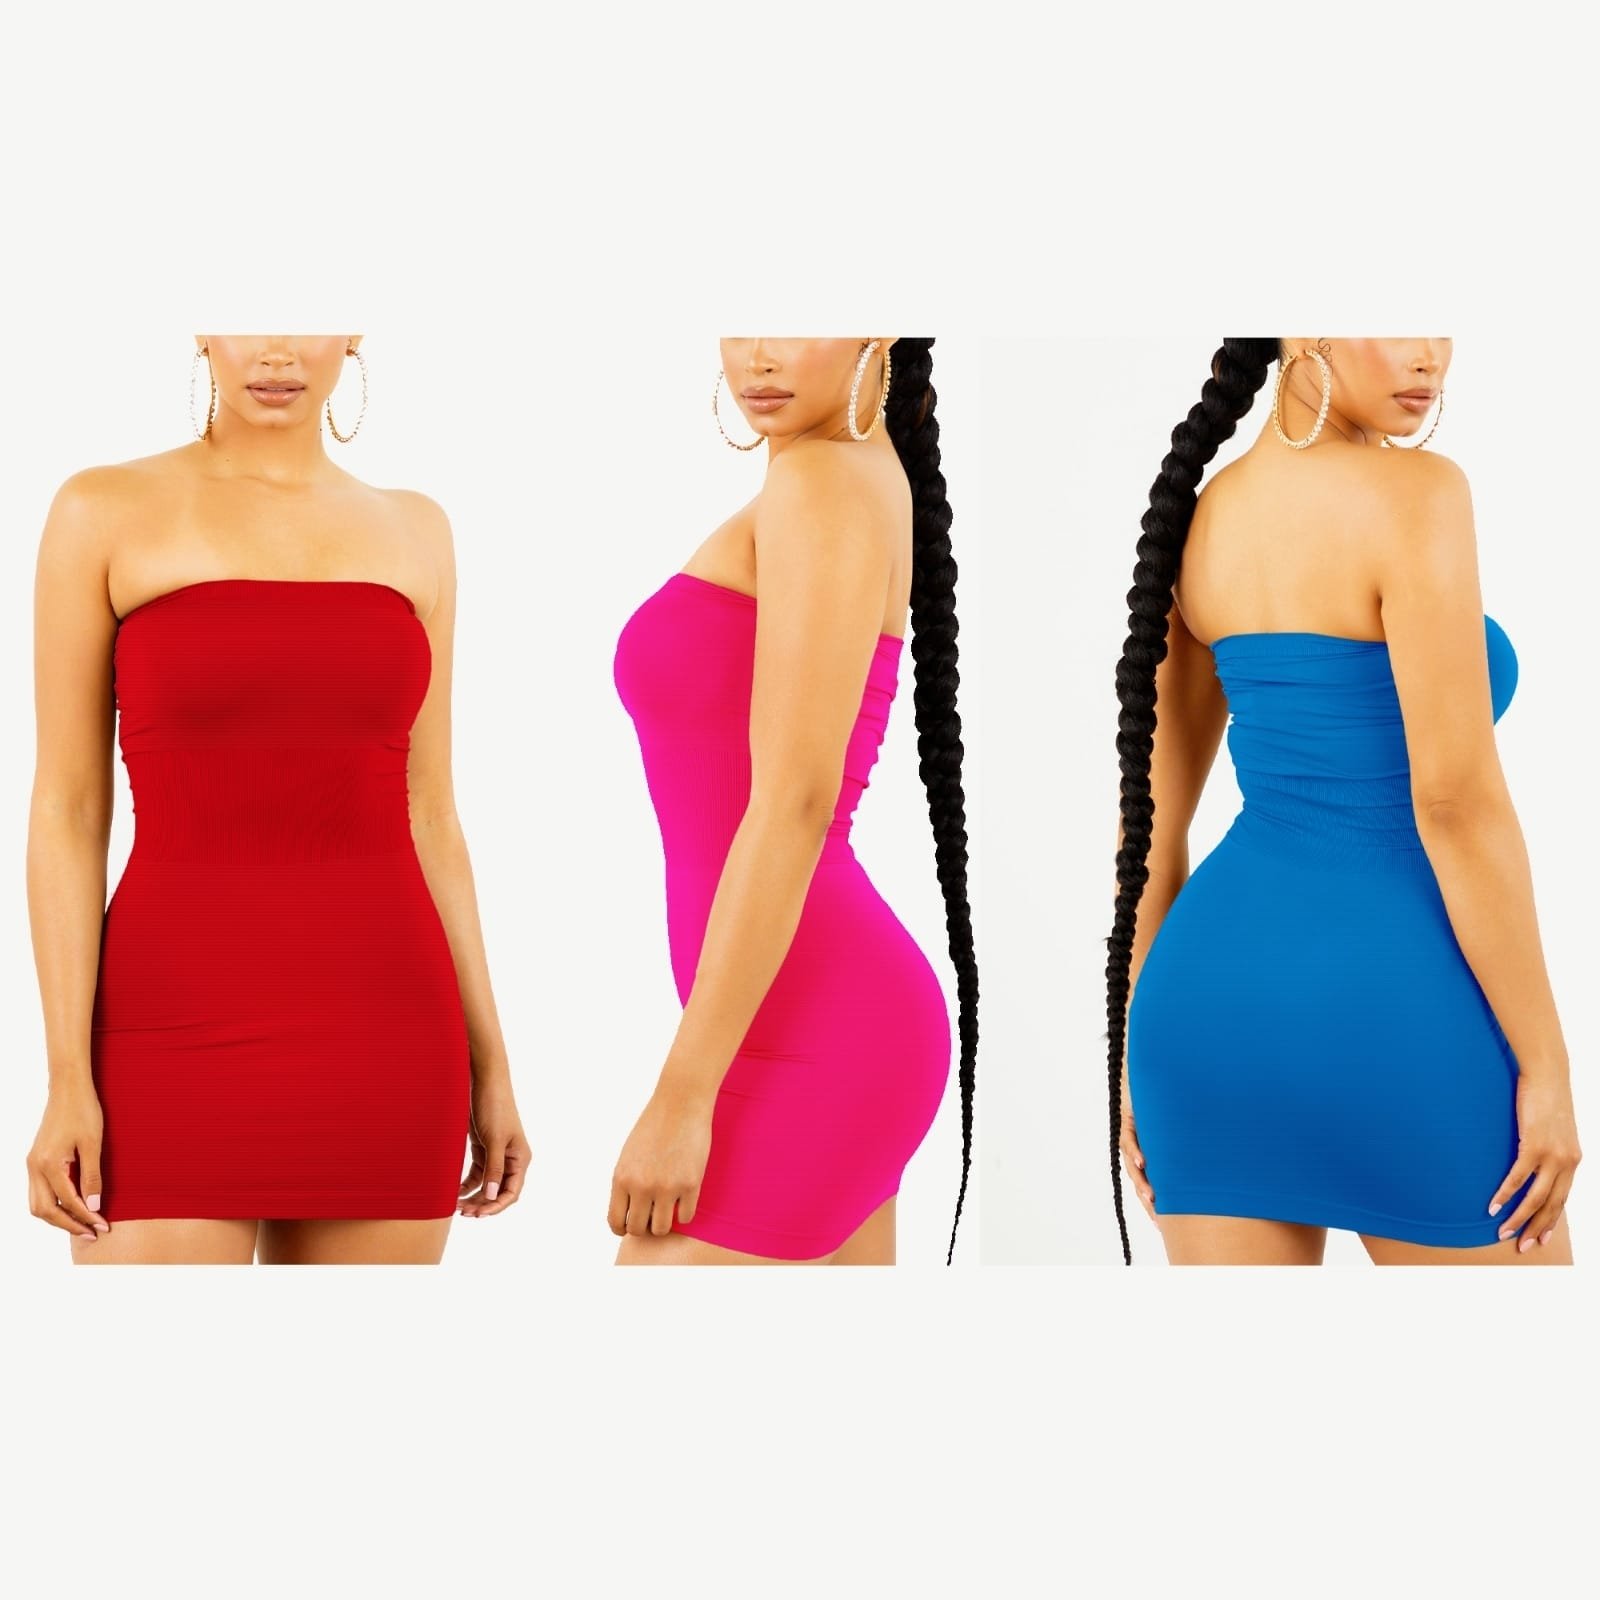 3-Pack Women's Strapless Stretchy Seamless Tight Fit Body Con Mini Tube Top Dress - BLUE, XL